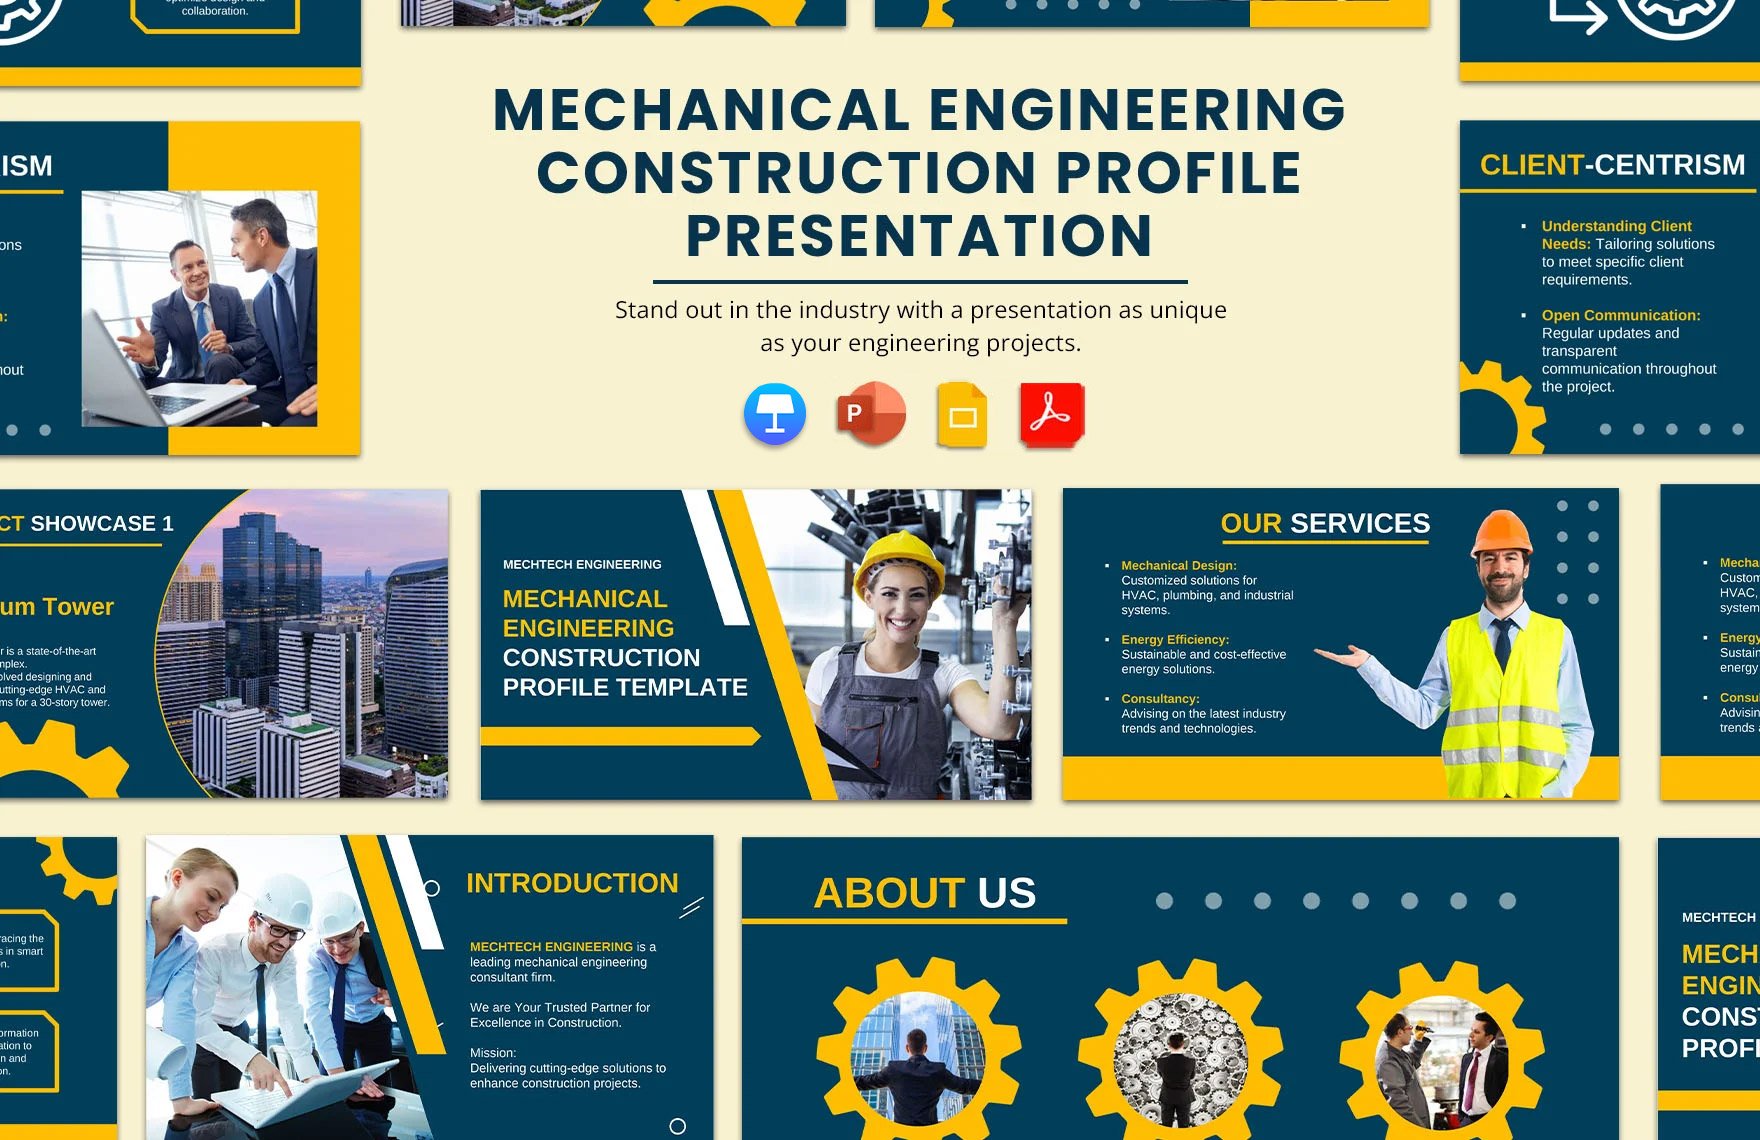 Mechanical Engineering Construction Profile Template in PDF, PowerPoint, Google Slides, Apple Keynote